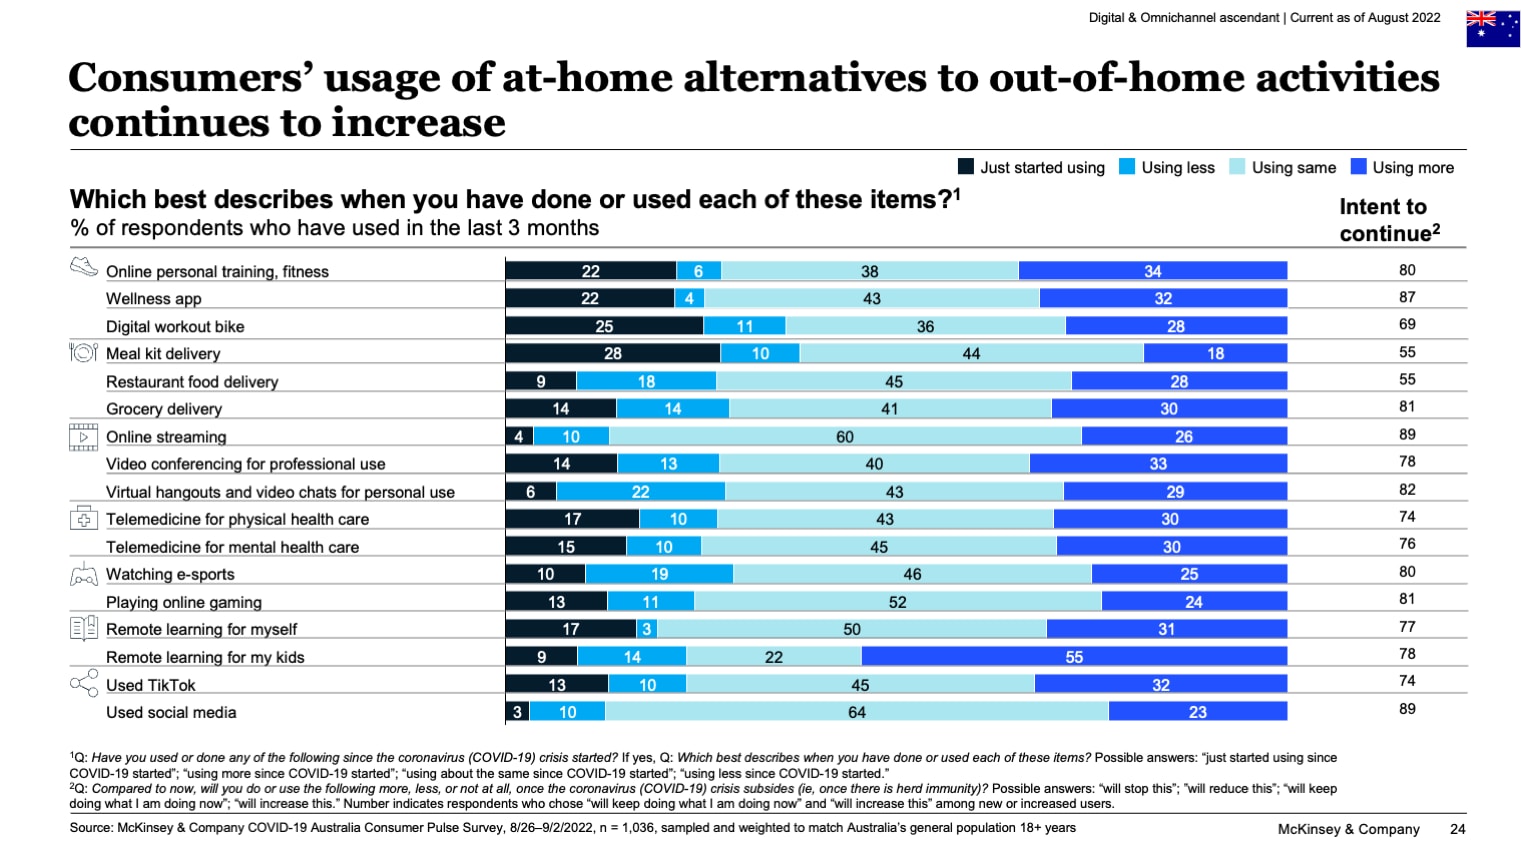 Consumers’ usage of at-home alternatives to out-of-home activities continues to increase